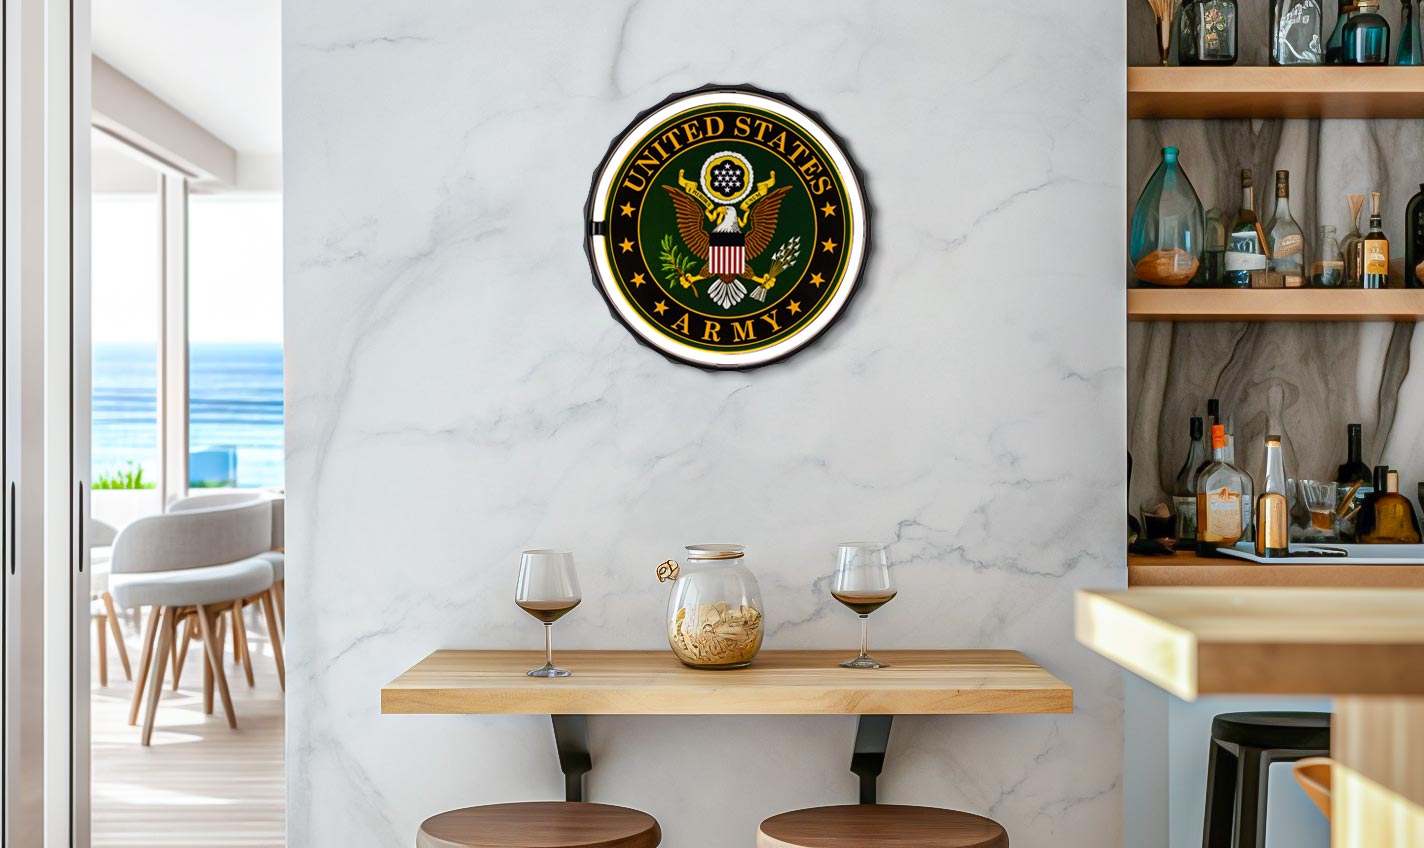 An American Art Decor United States Army rope LED sign hangs on a kitchen bar wall overlooking the beach.